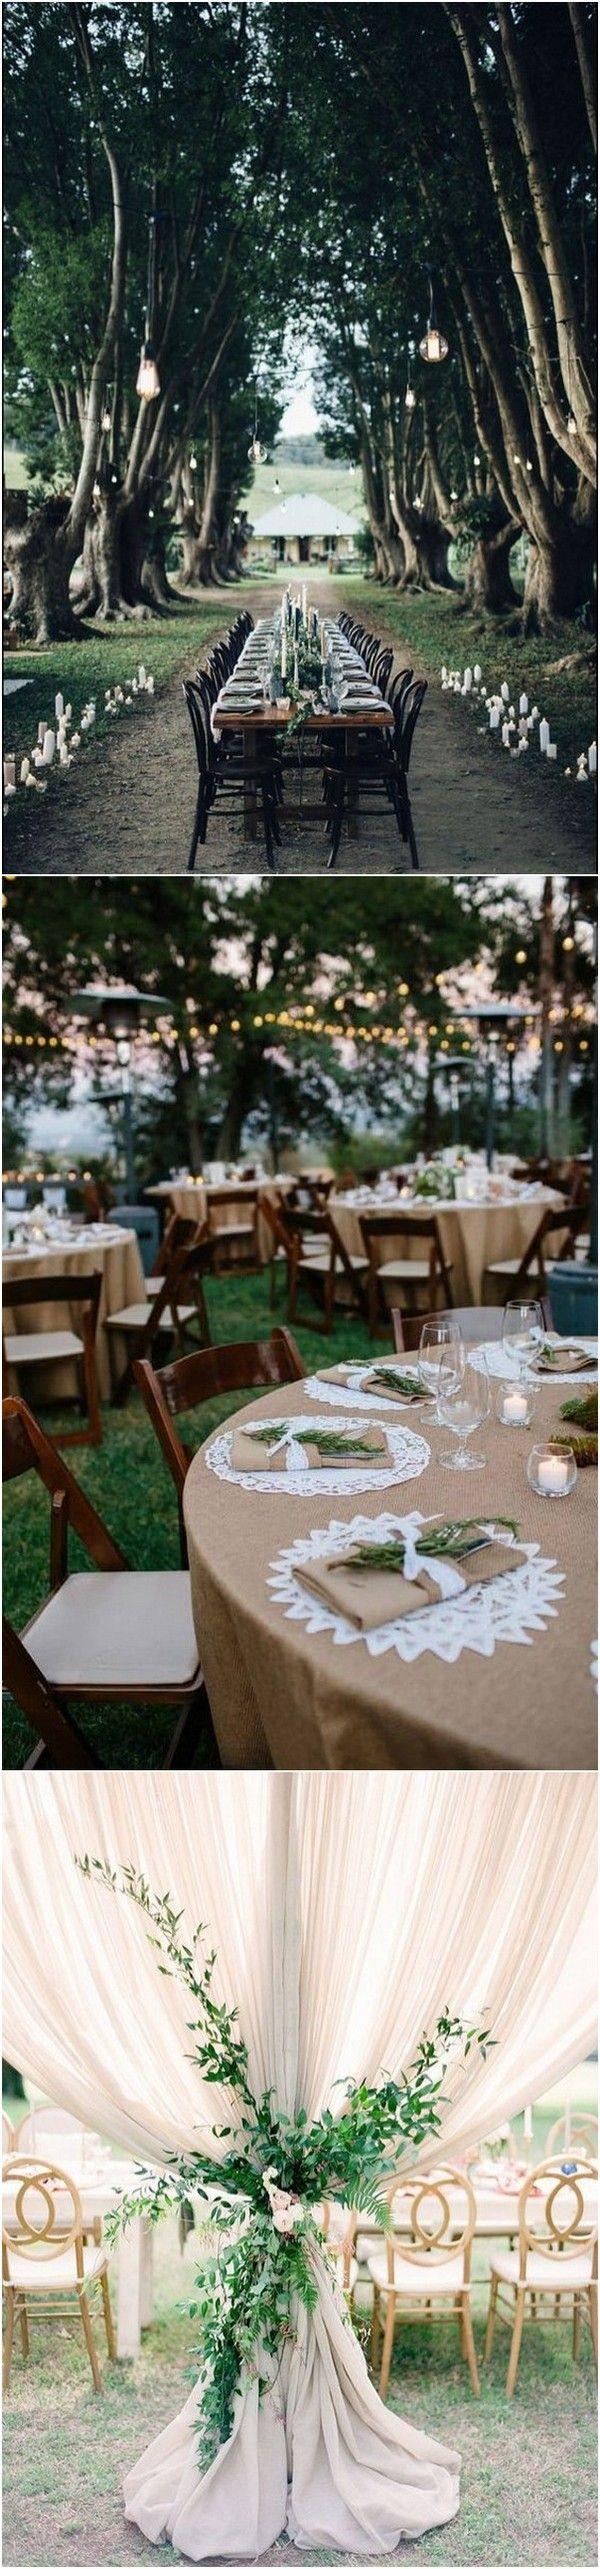 Mariage - 40 Boho Chic Outdoor Wedding Ideas - Page 2 Of 2